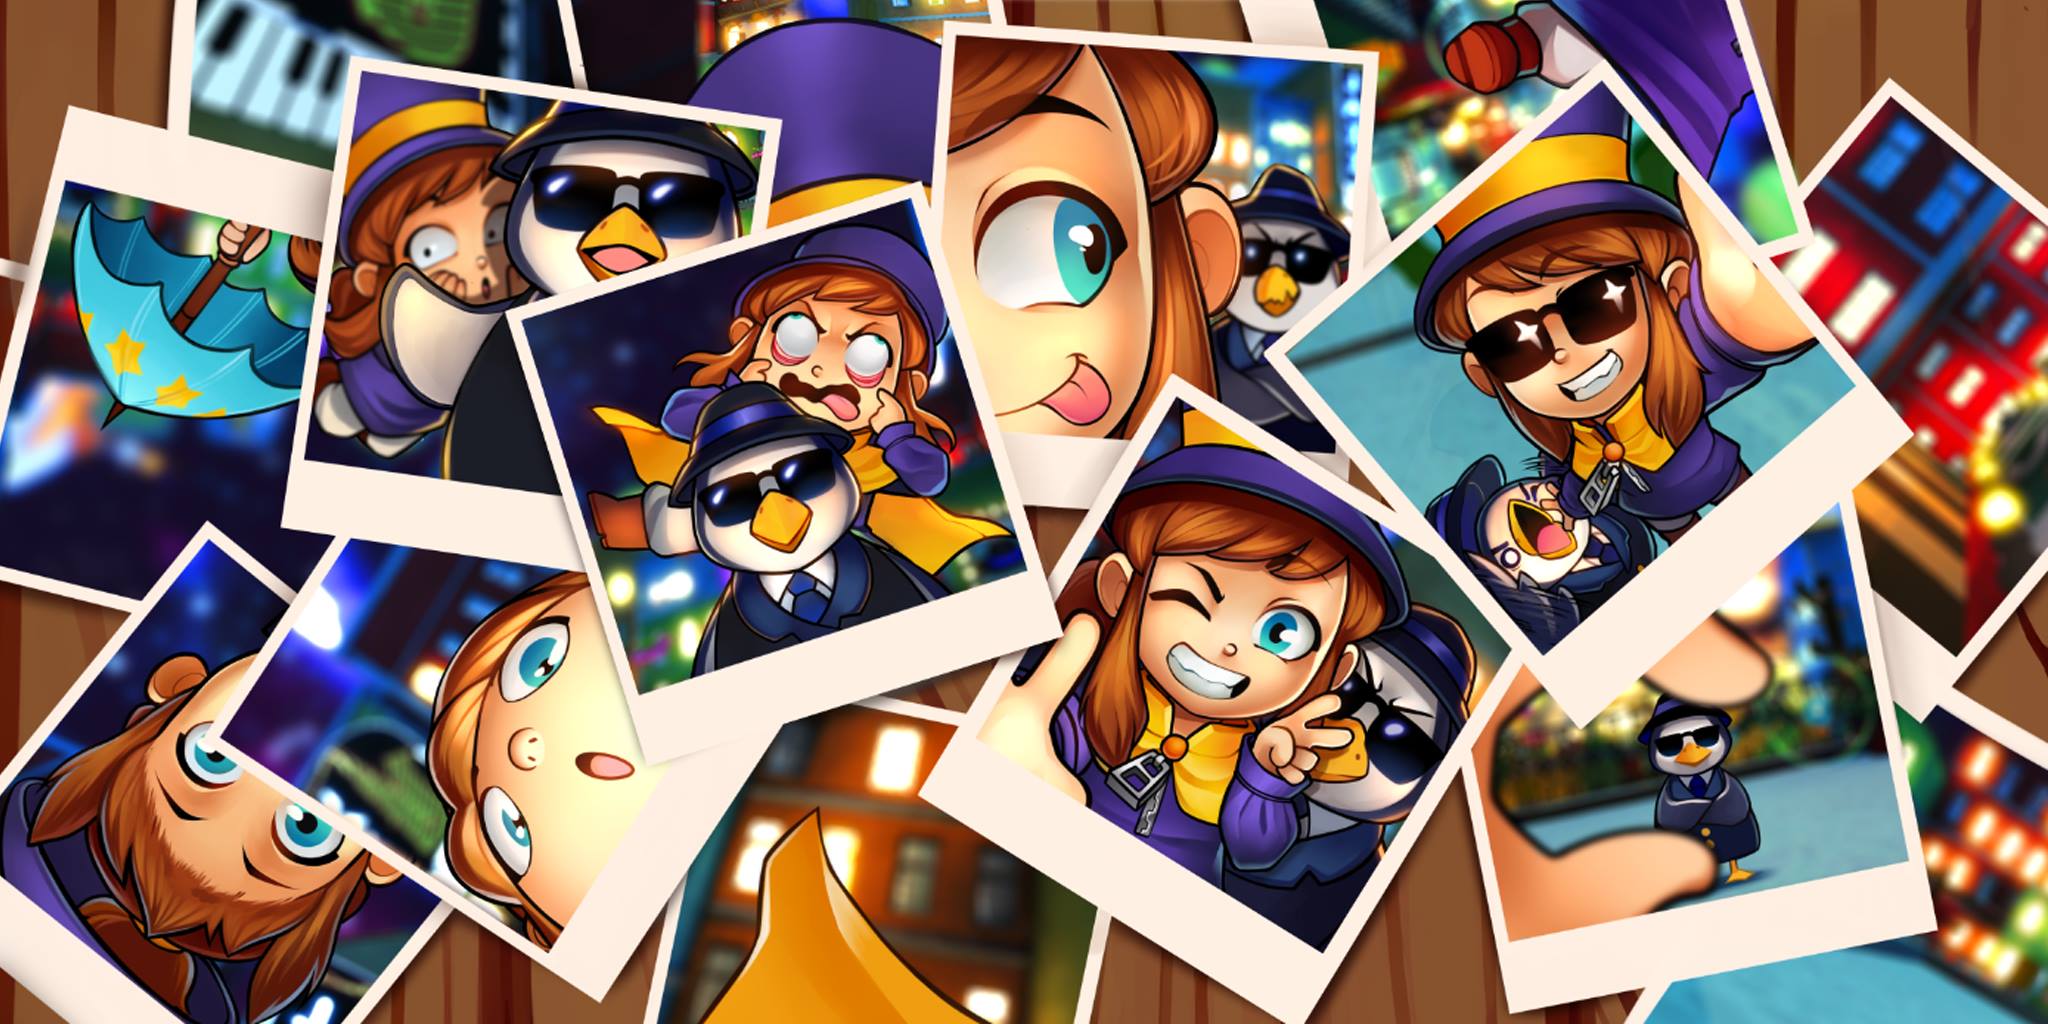 A Hat in Time - Review — Steemit